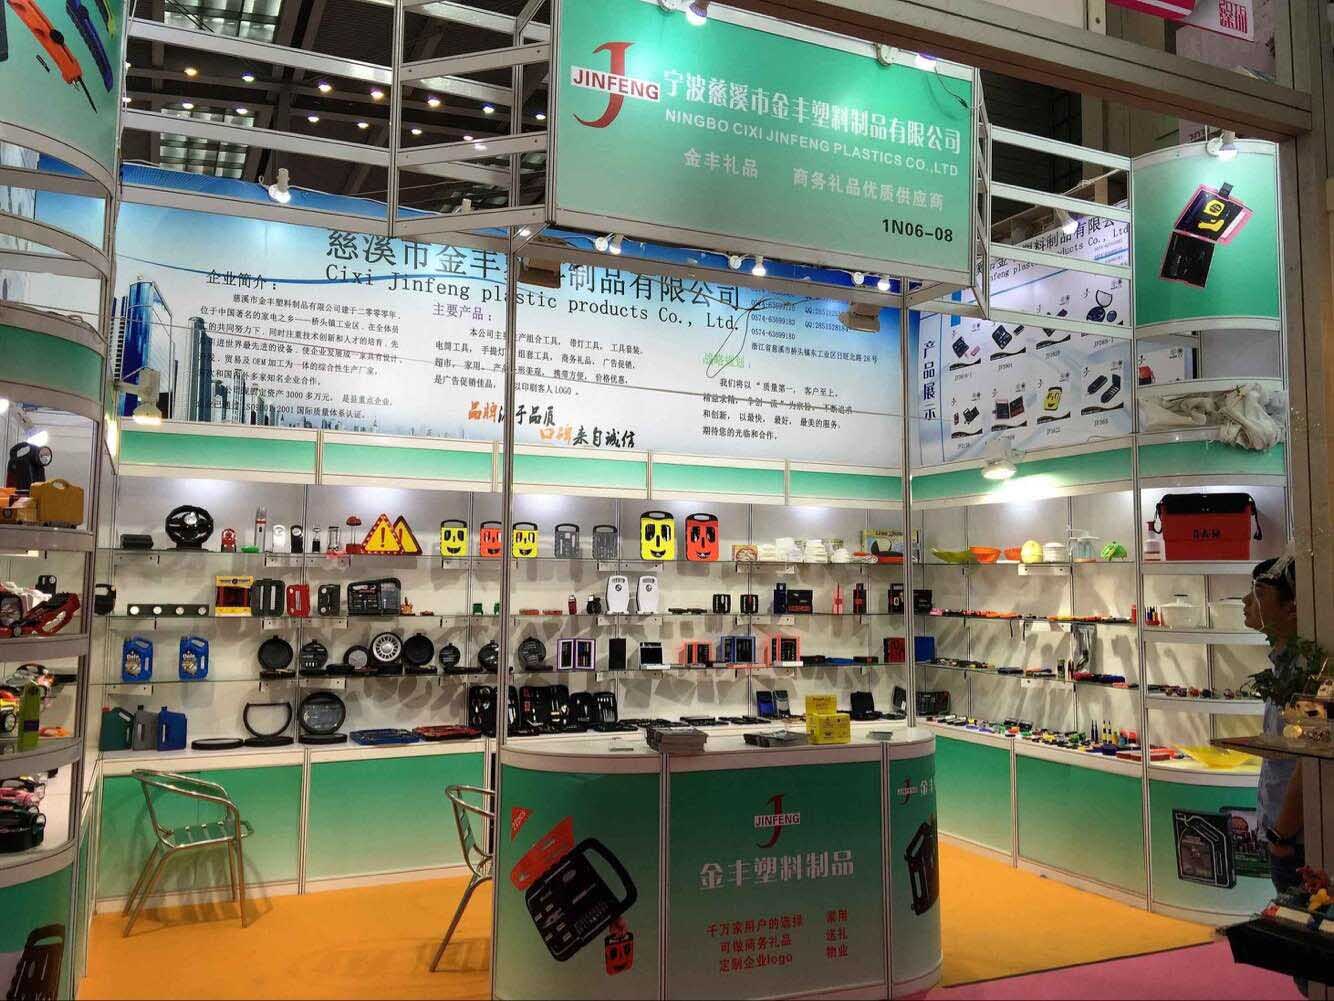 The 24th China (shenzhen) international gifts and household goods exhibition